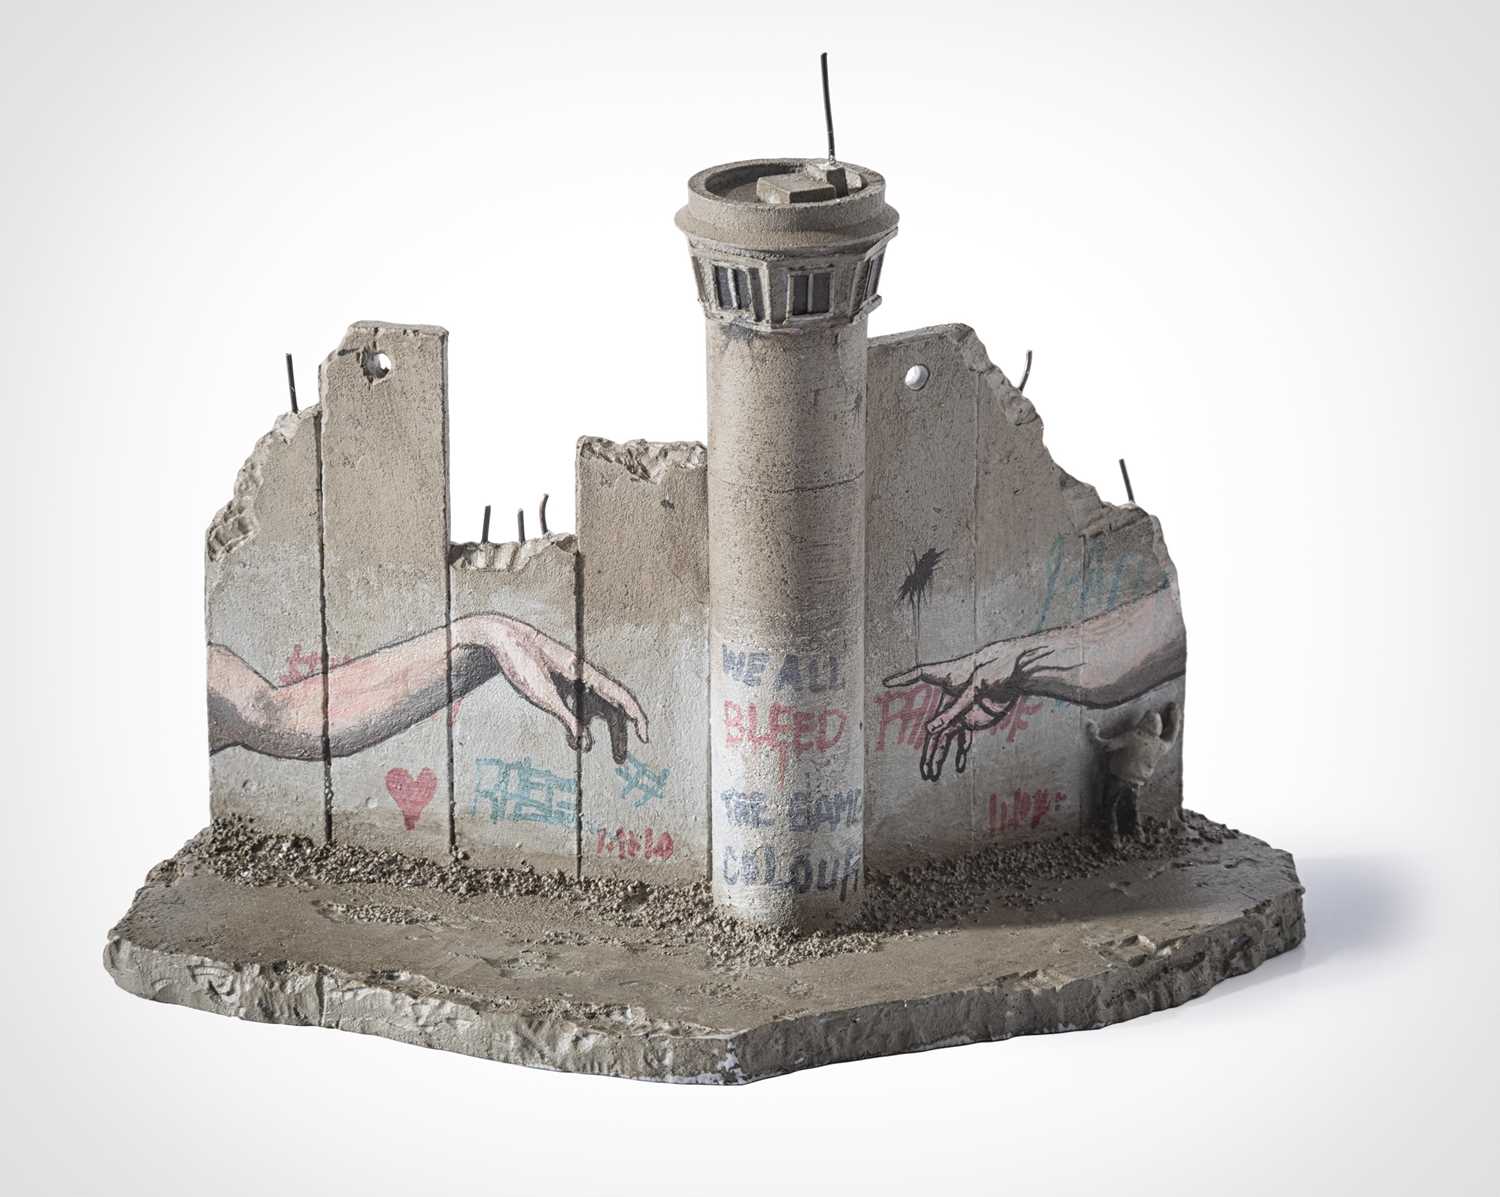 Lot 60 - Banksy (British 1974-), Walled Off Hotel, Deafeated - Eight-Part Souvenir Wall Section With Watch Tower (The Creation Of Adam)